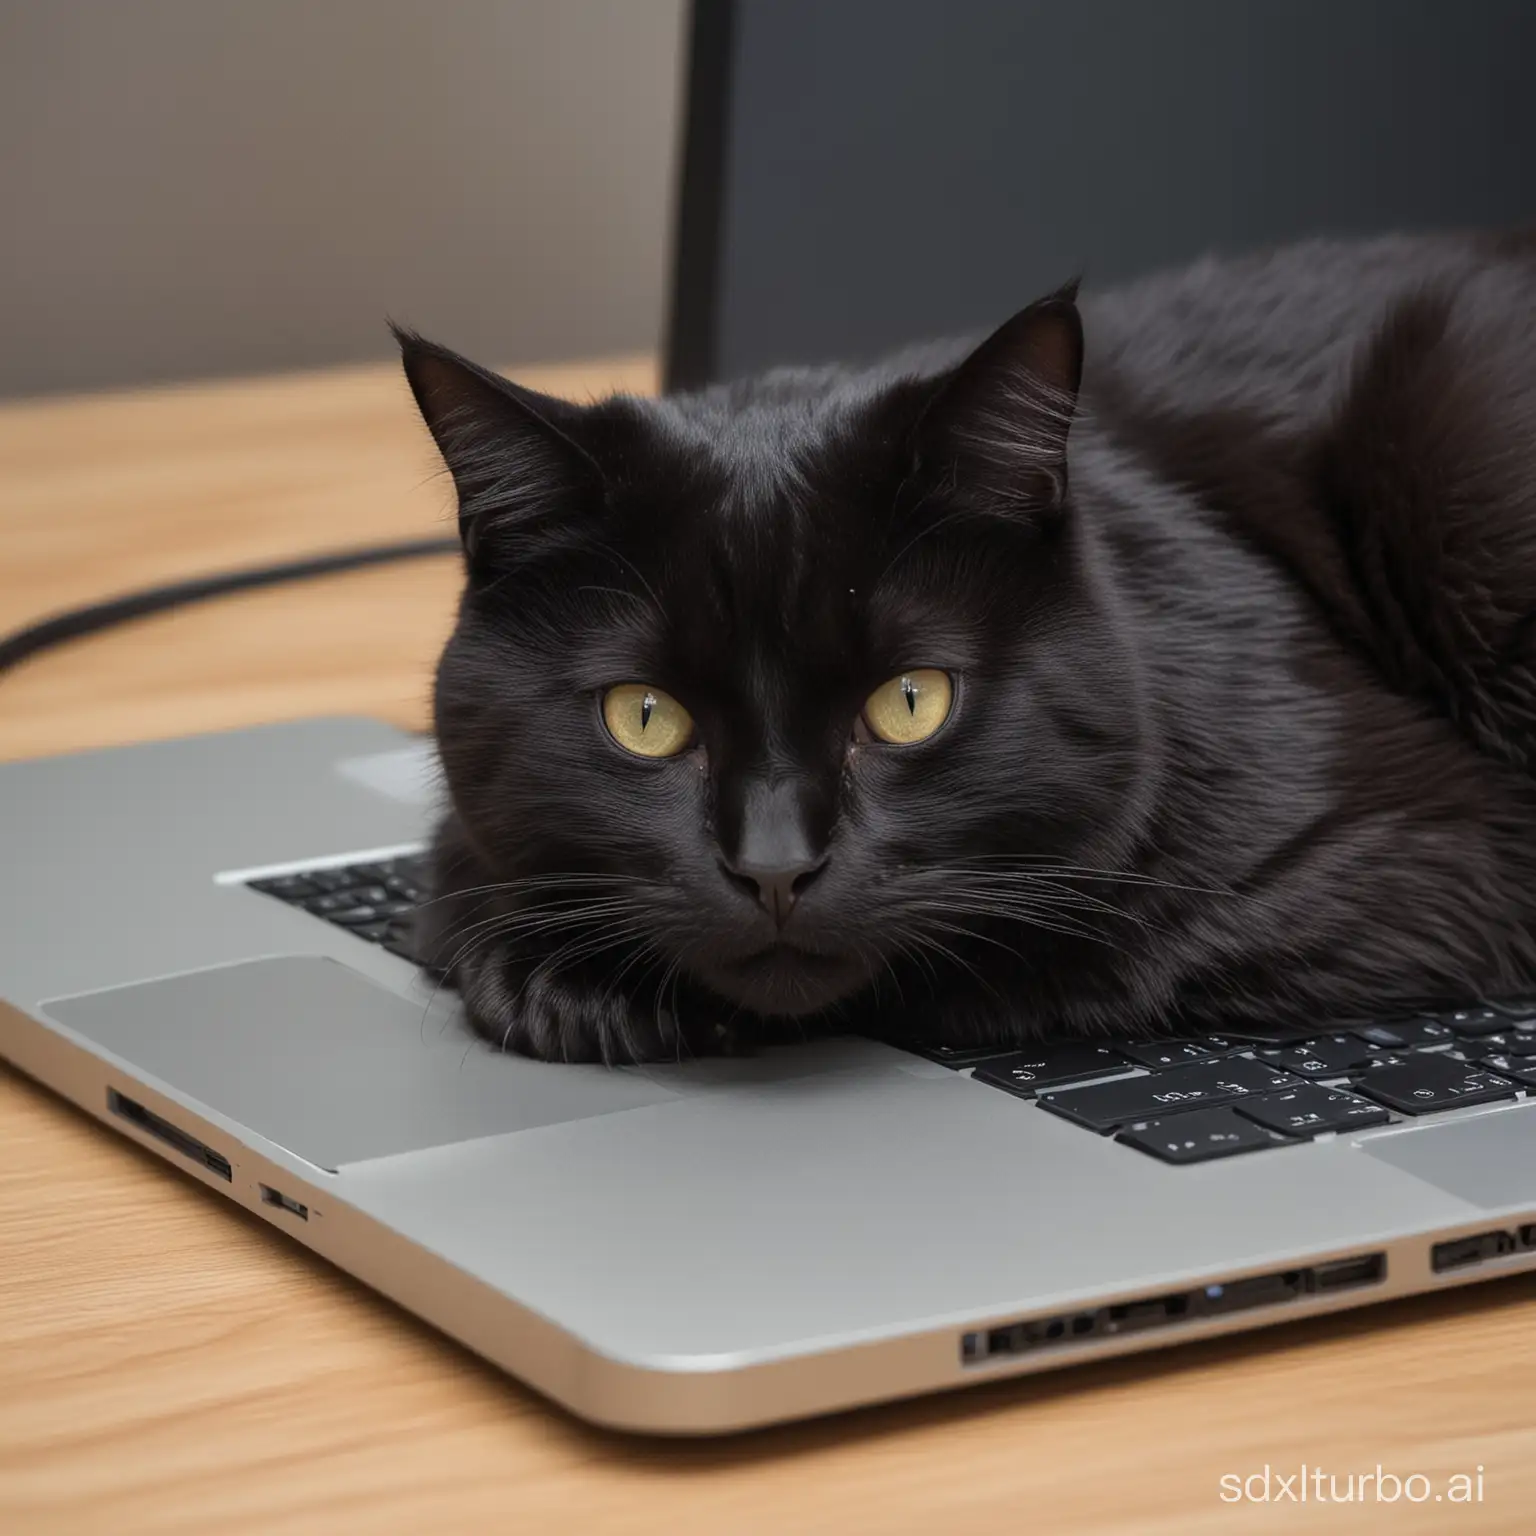 The black cat is lying on the MacBook.